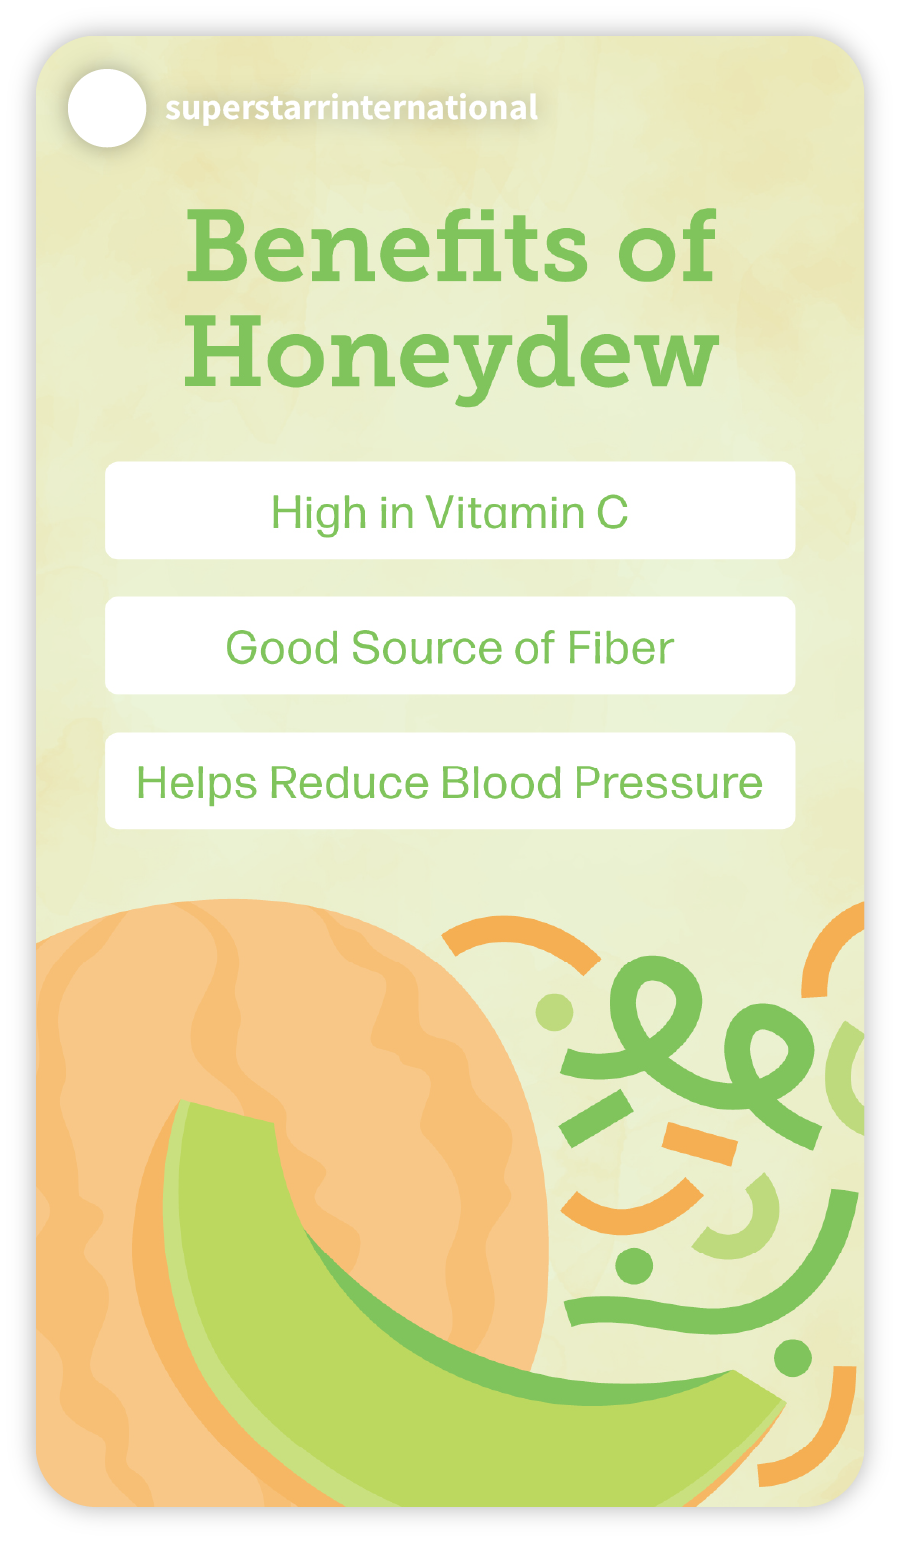 Example of a Super Starr Instagram story that says "Benefits of Honeydew" with illustrations of honeydew melons